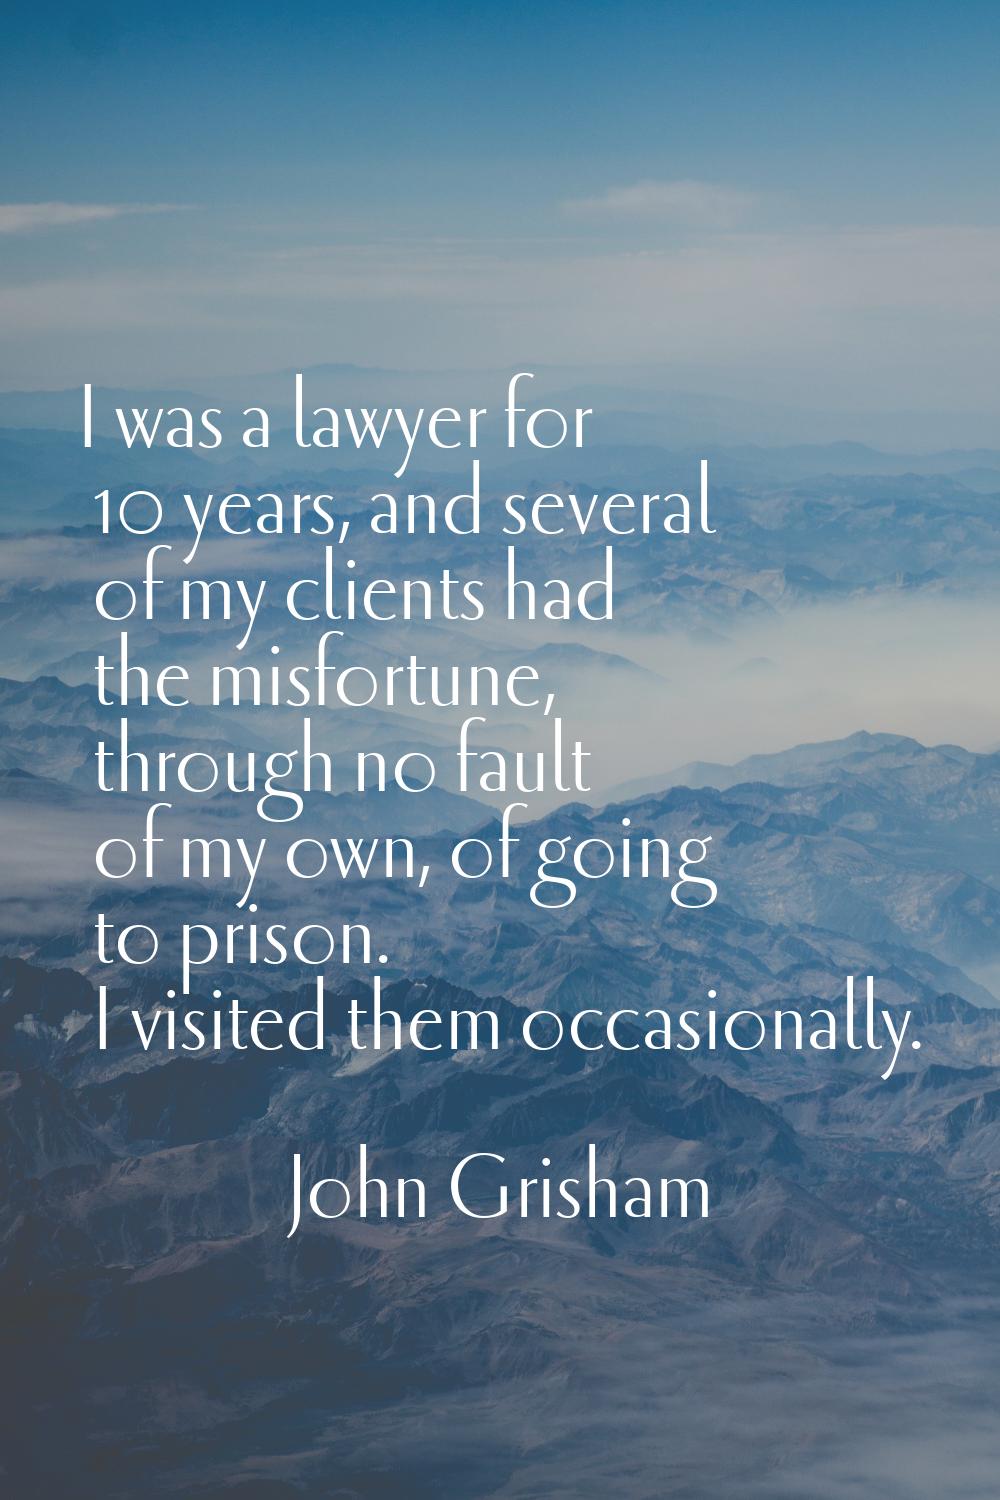 I was a lawyer for 10 years, and several of my clients had the misfortune, through no fault of my o